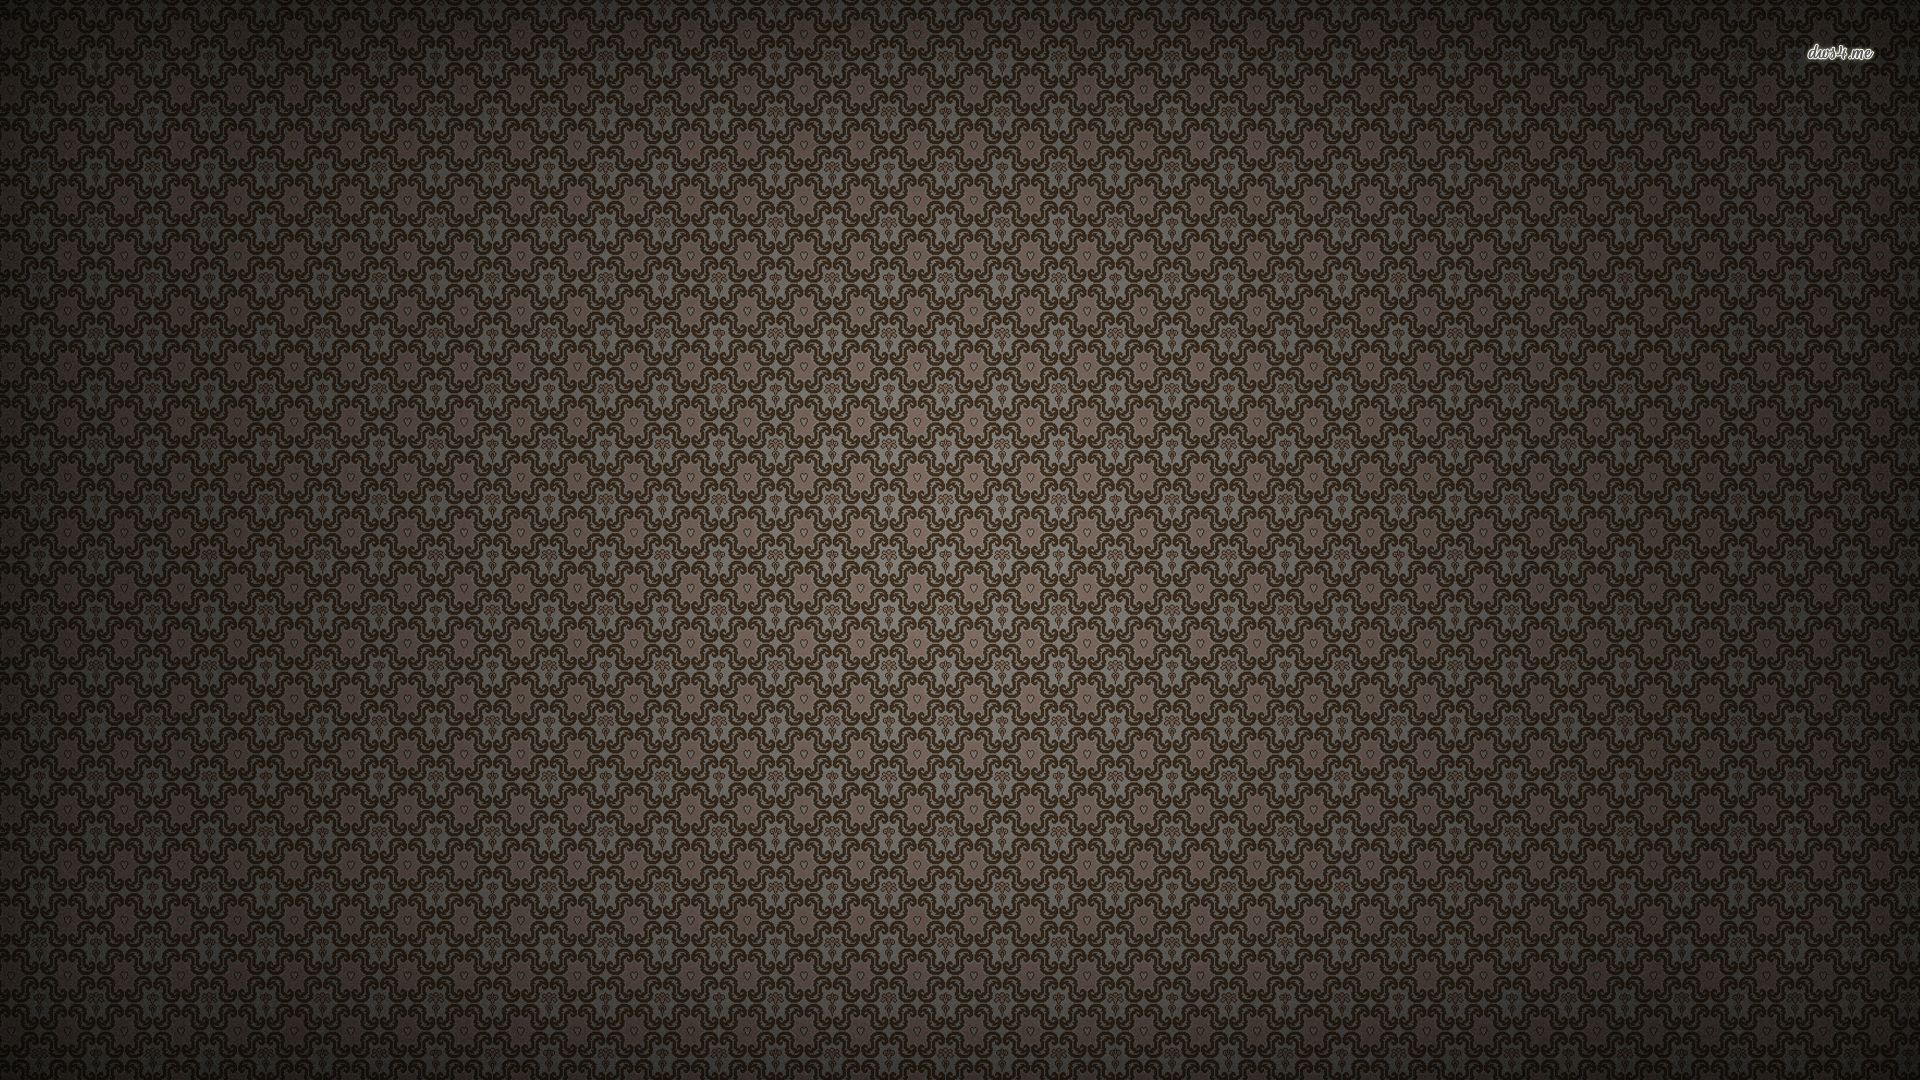 Fabric Wallpapers - 4k, HD Fabric Backgrounds on WallpaperBat